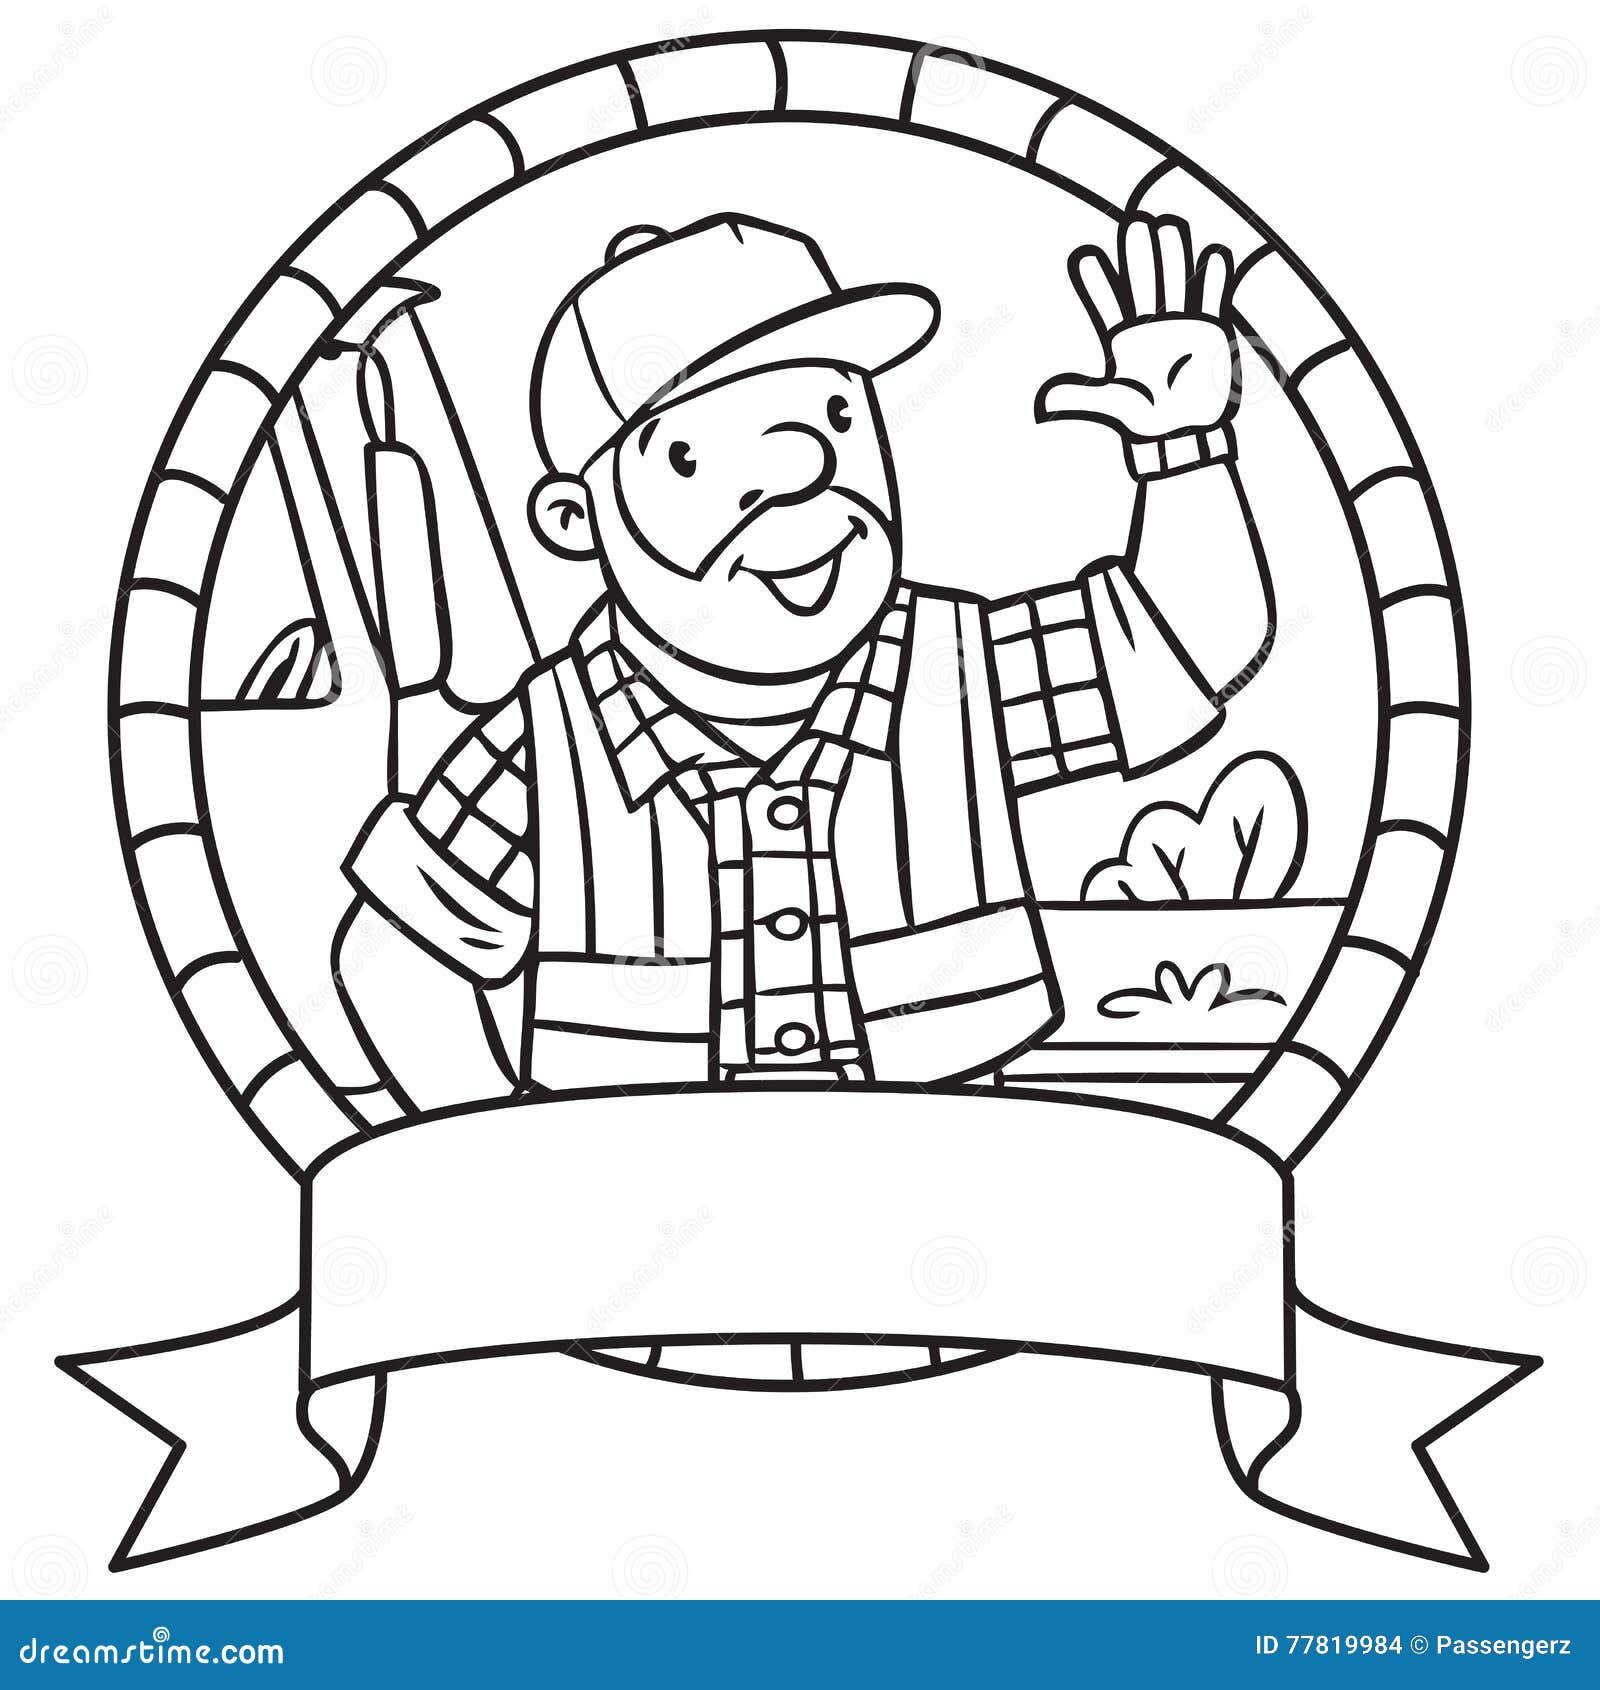 Download Coloring Book Of Funny Driver Or Worker. Emblem. Stock Vector - Illustration of cheerful ...